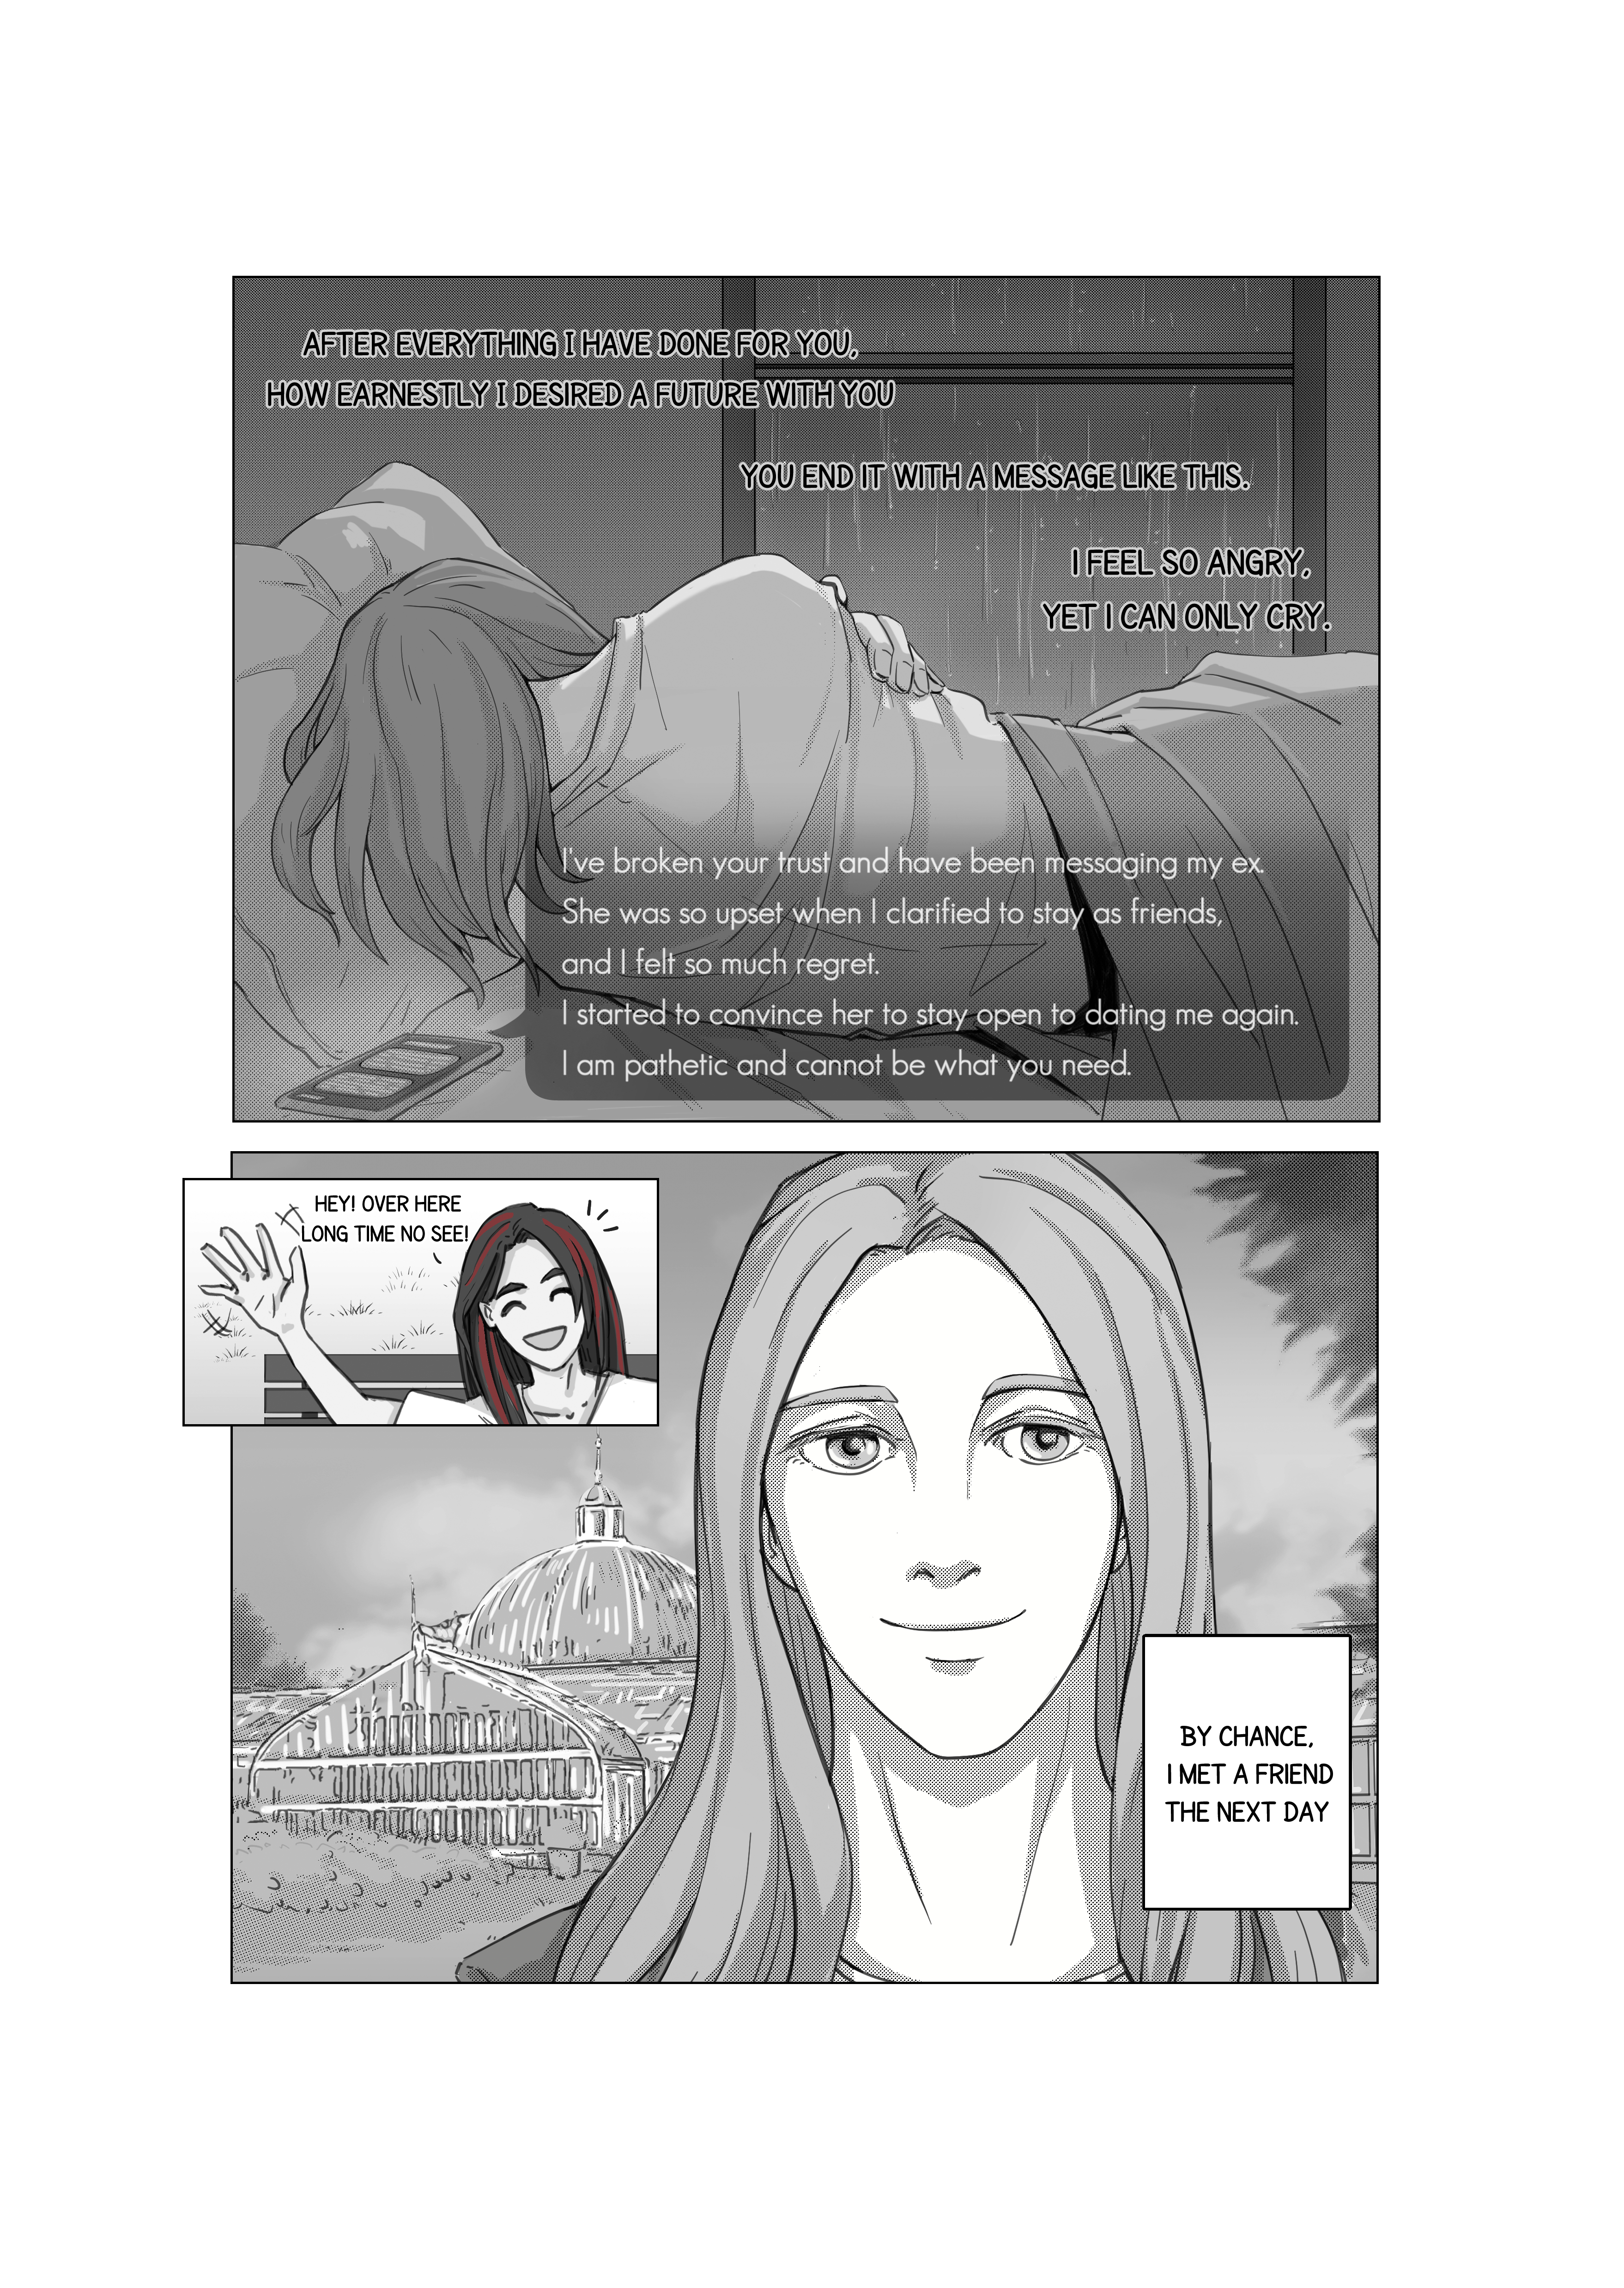 Healing and Finding Love: A Heartfelt Story in Our New 4-Koma